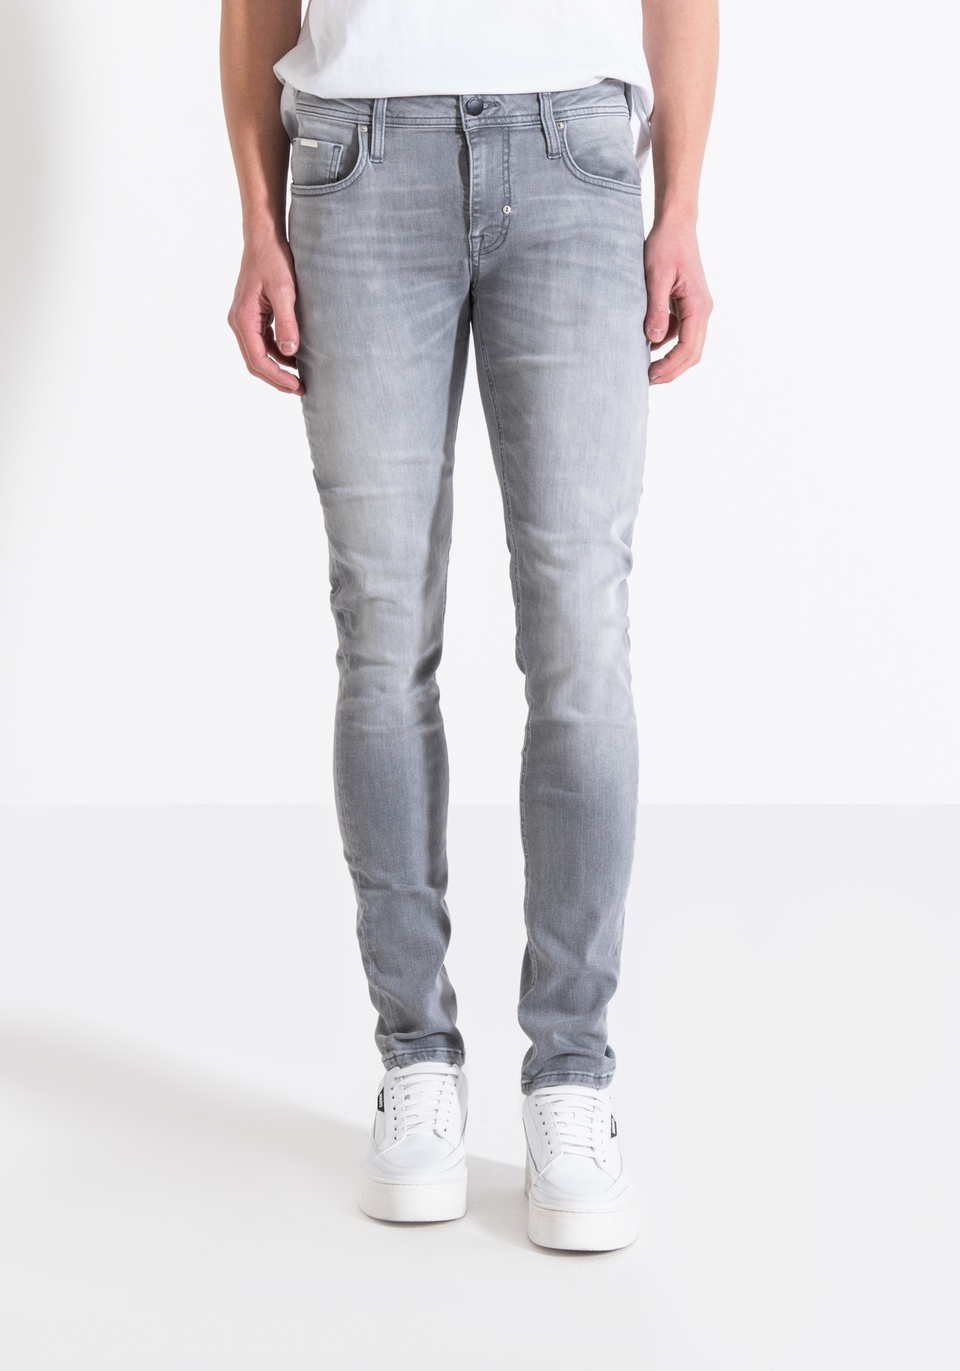 JEANS TAPERED FIT “OZZY” IN DENIM POWER STRETCH - Antony Morato Online Shop